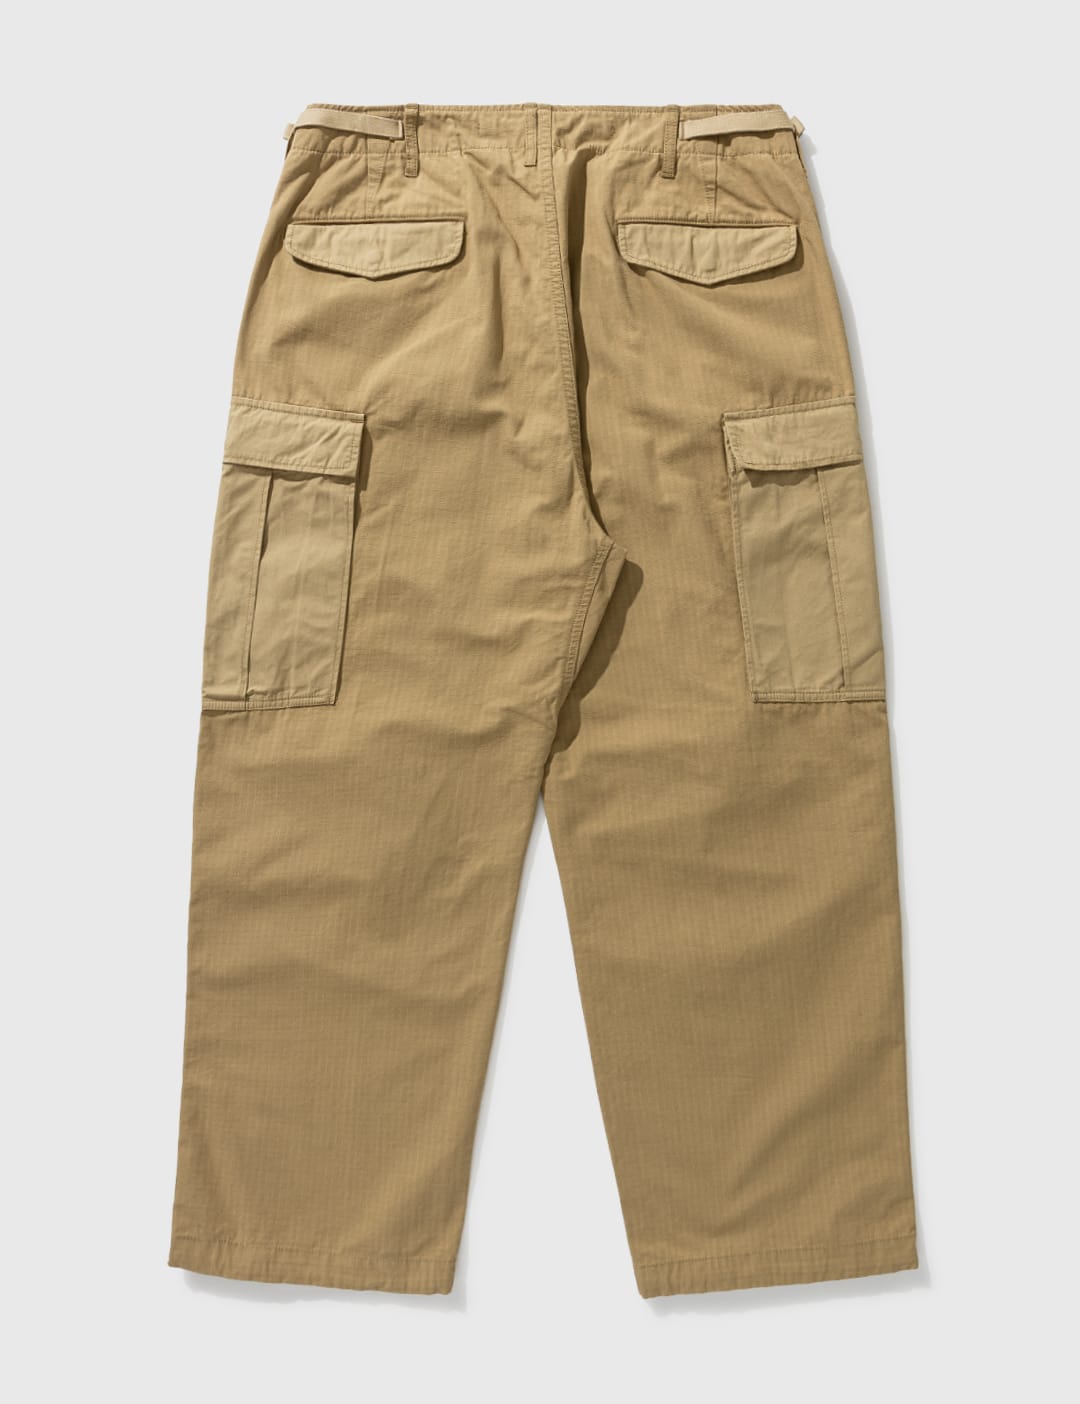 Nanamica - Cargo Pants | HBX - Globally Curated Fashion and 